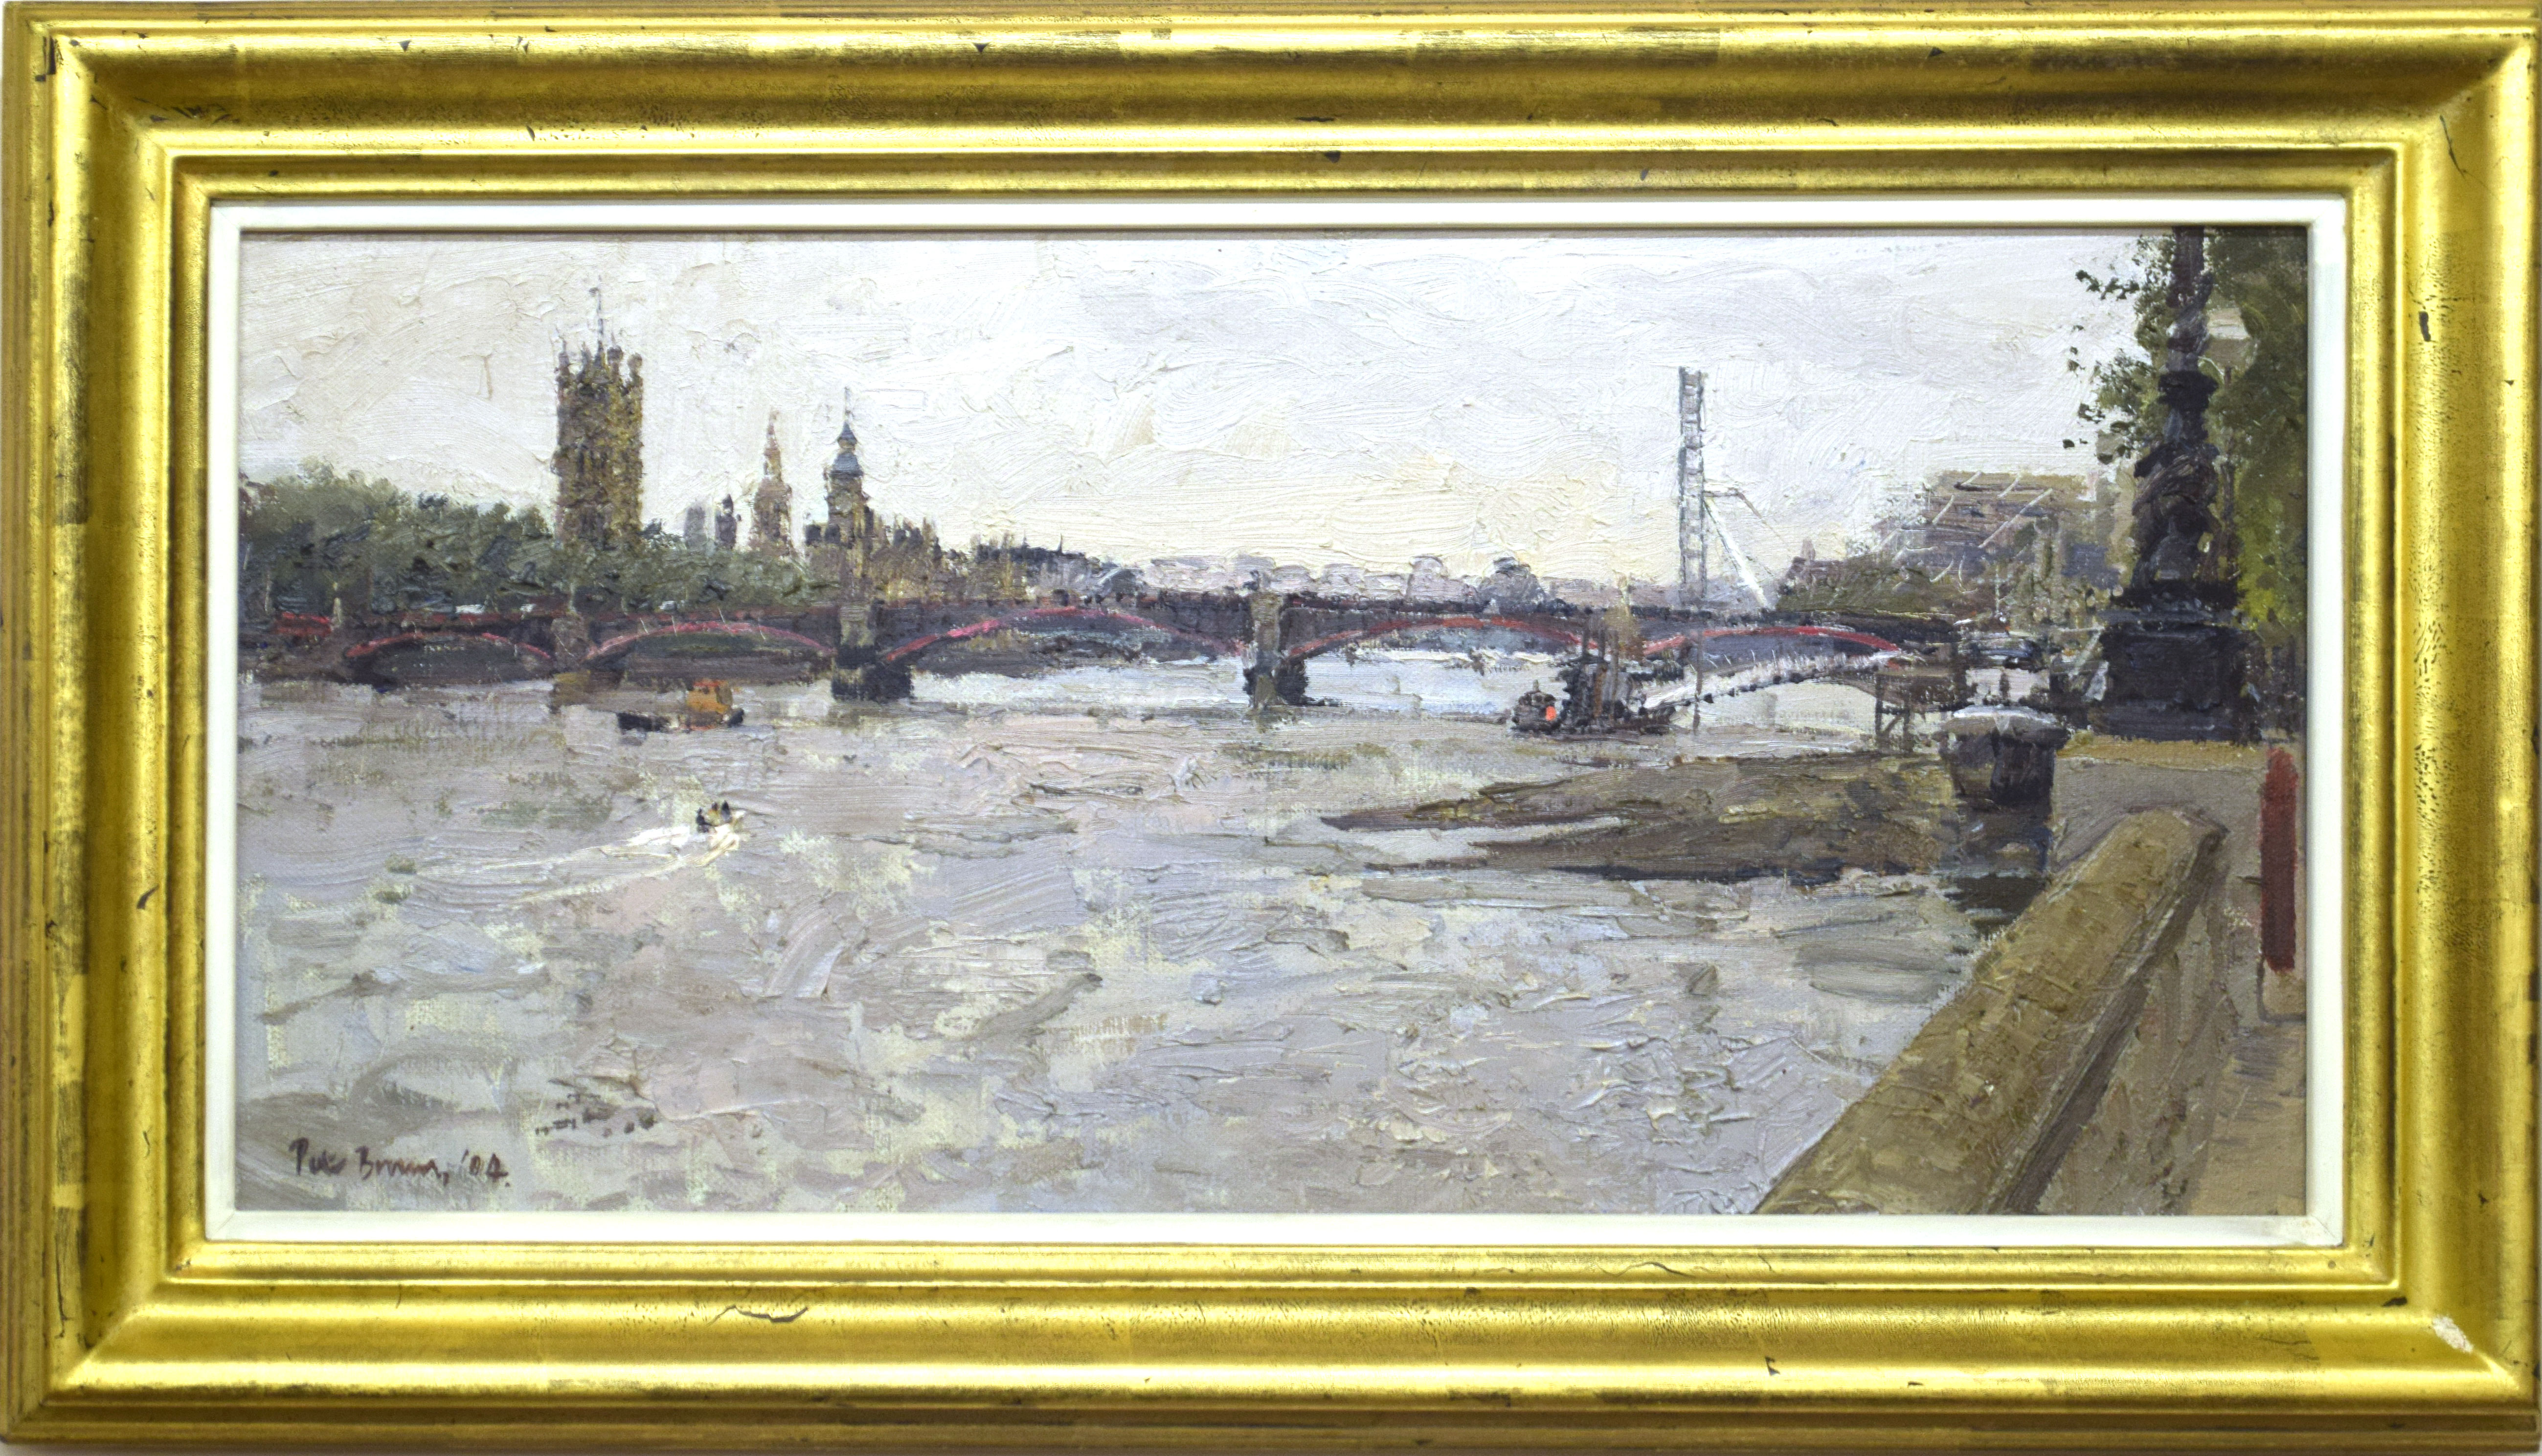 •AR Peter Brown, NEAC (born 1967), "Lambeth Bridge", oil on canvas, signed and dated 04 lower